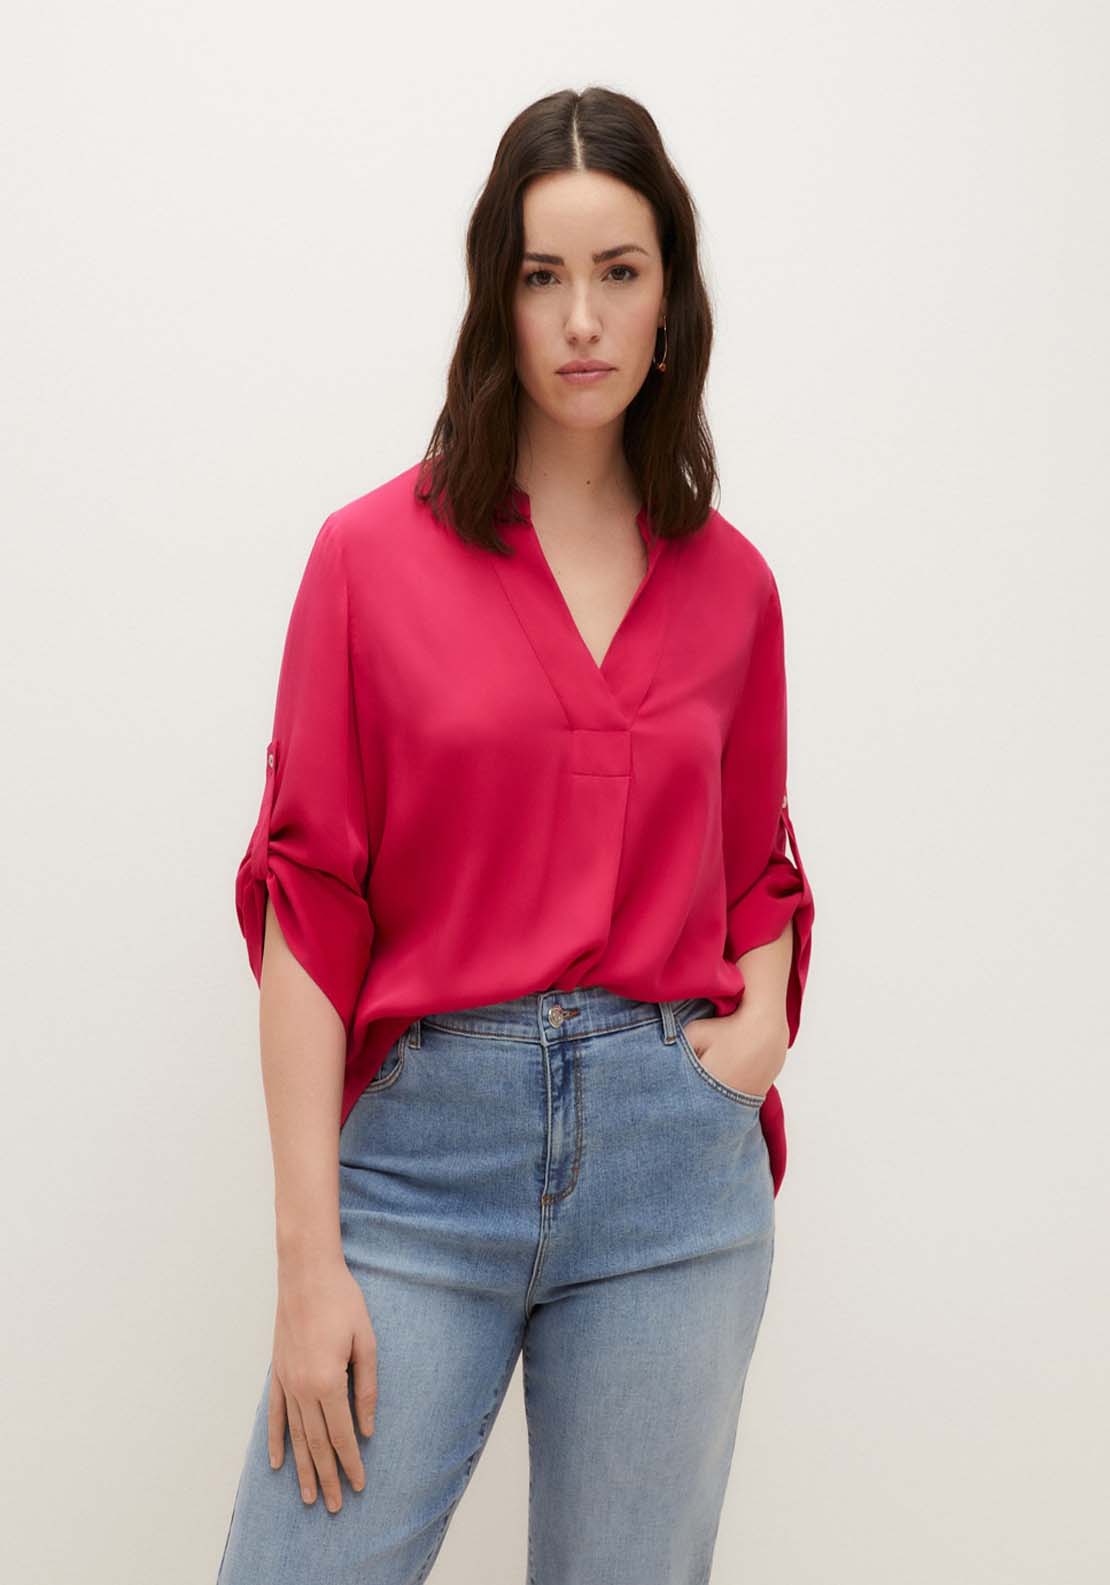 Couchel Long Sleeve Blouse - Fuchsia 1 Shaws Department Stores